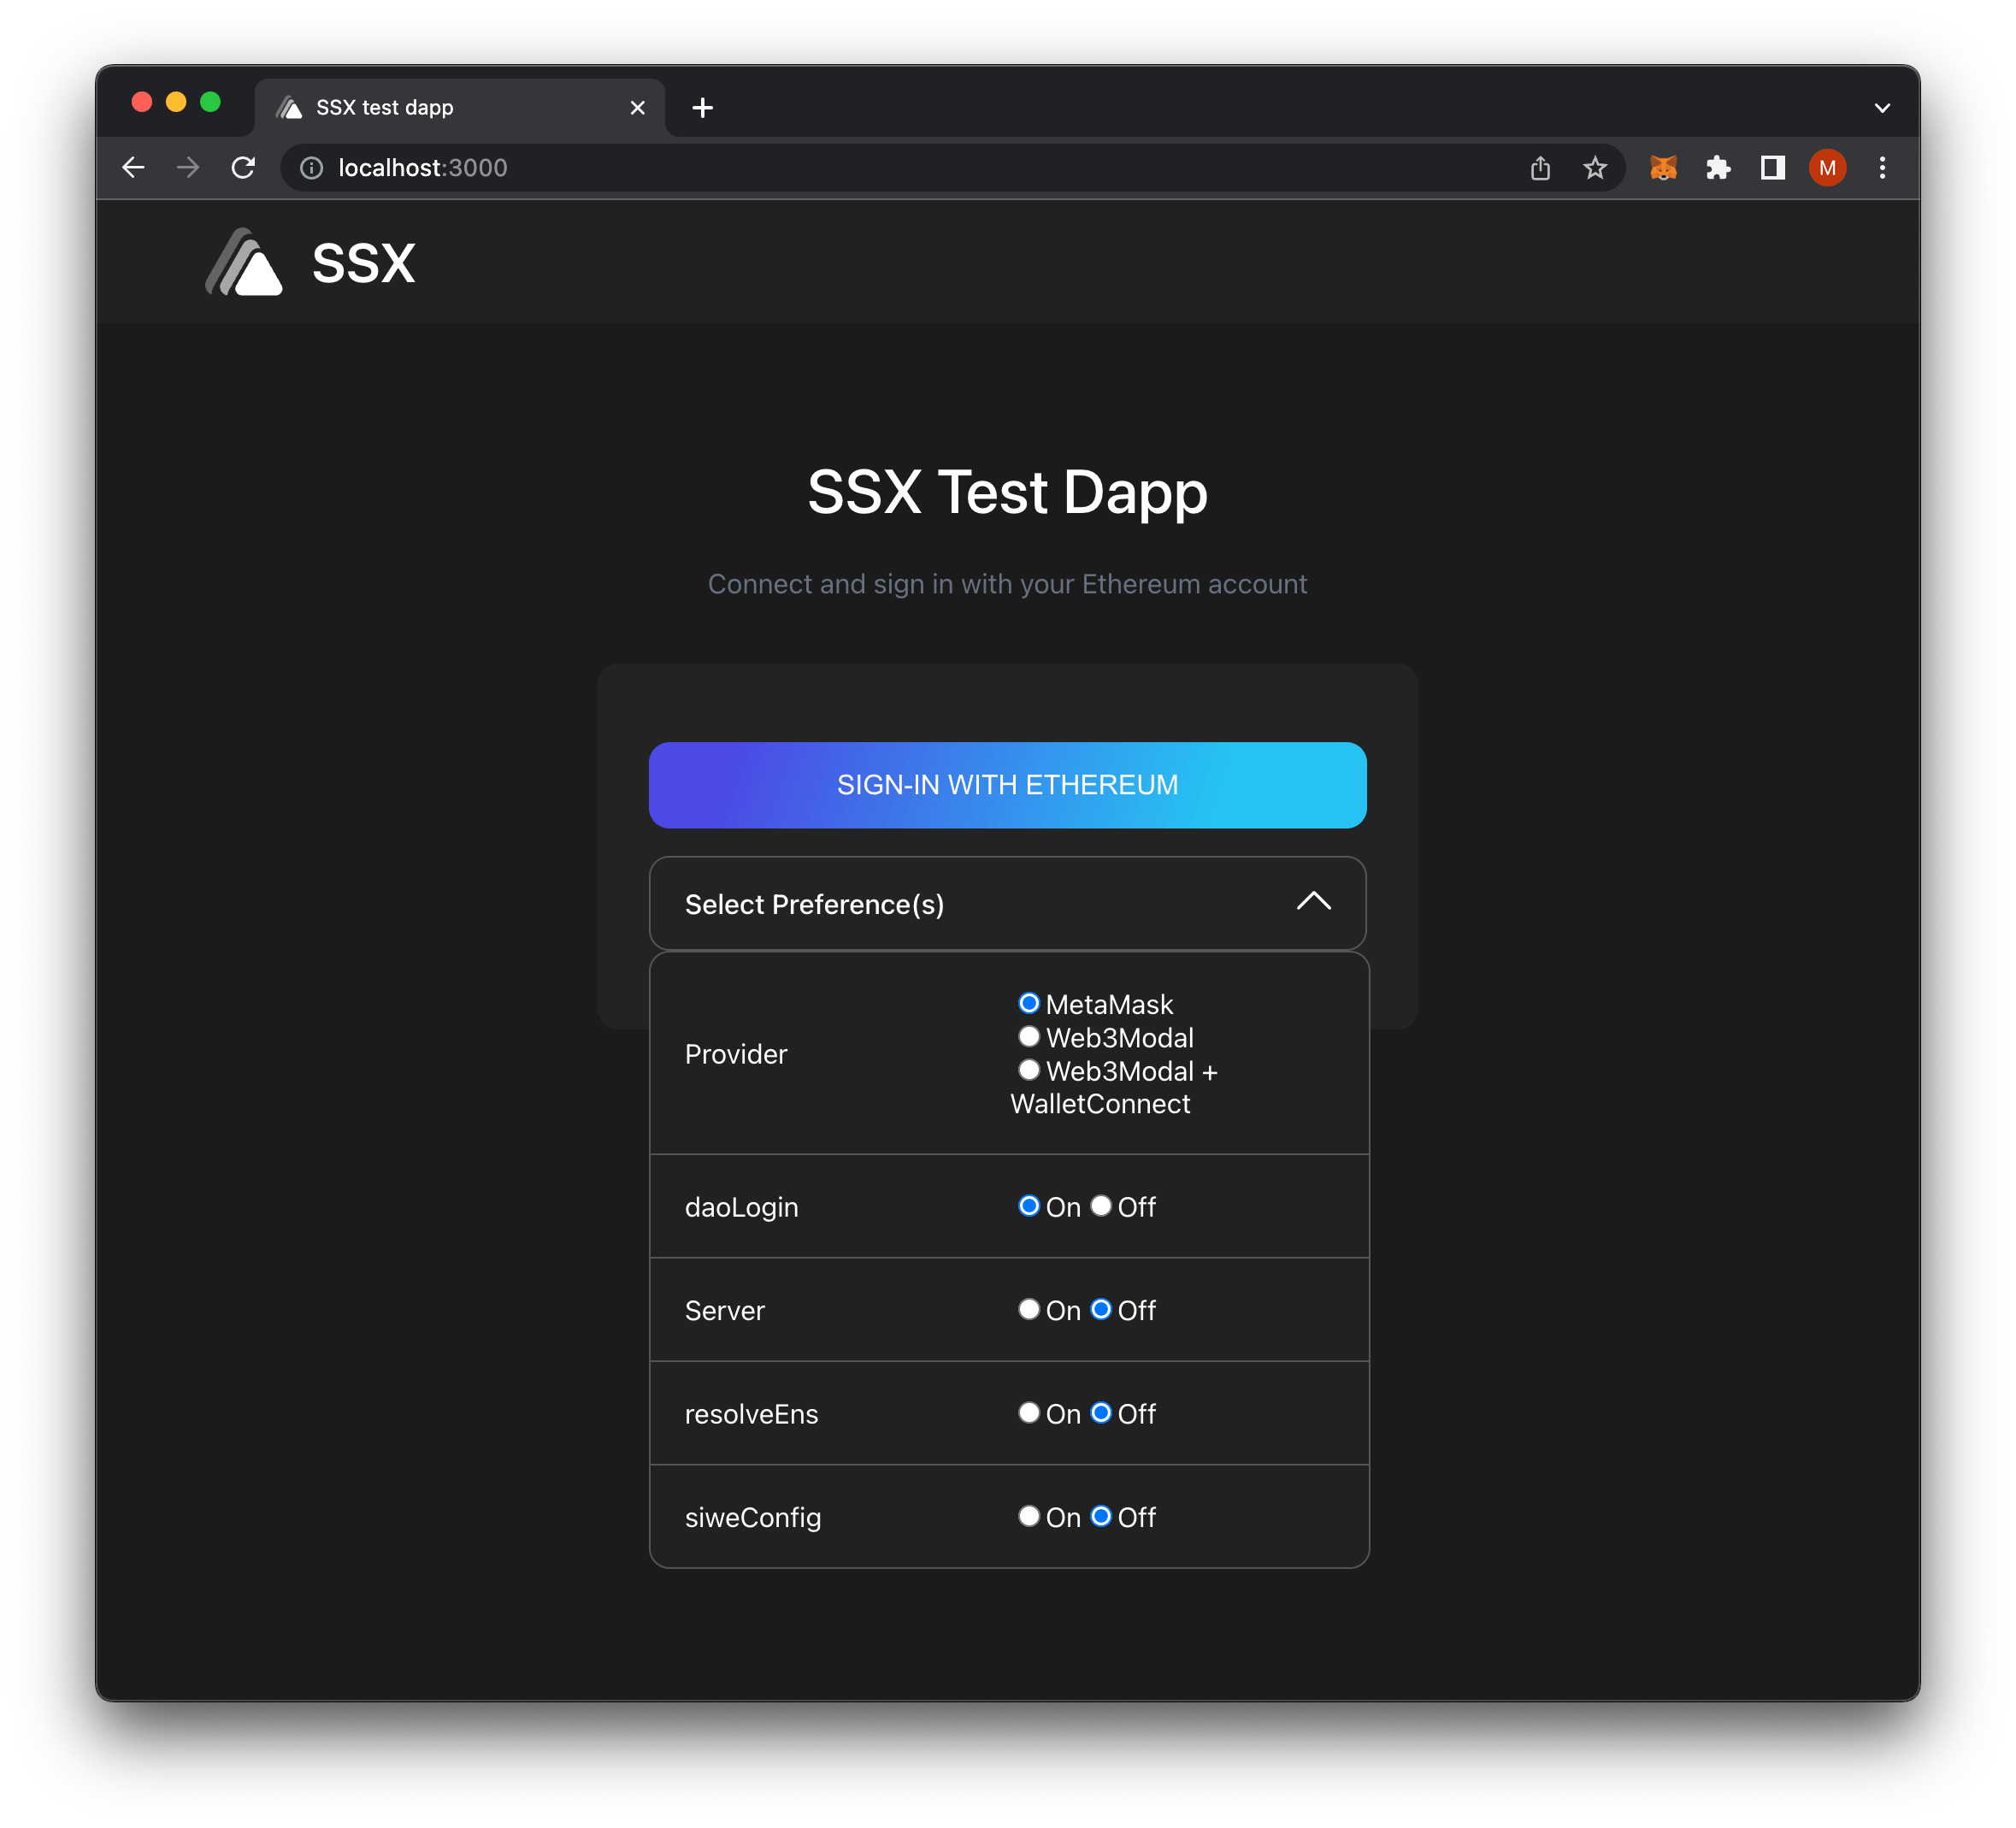 SSX Example Test Dapp With Preferences